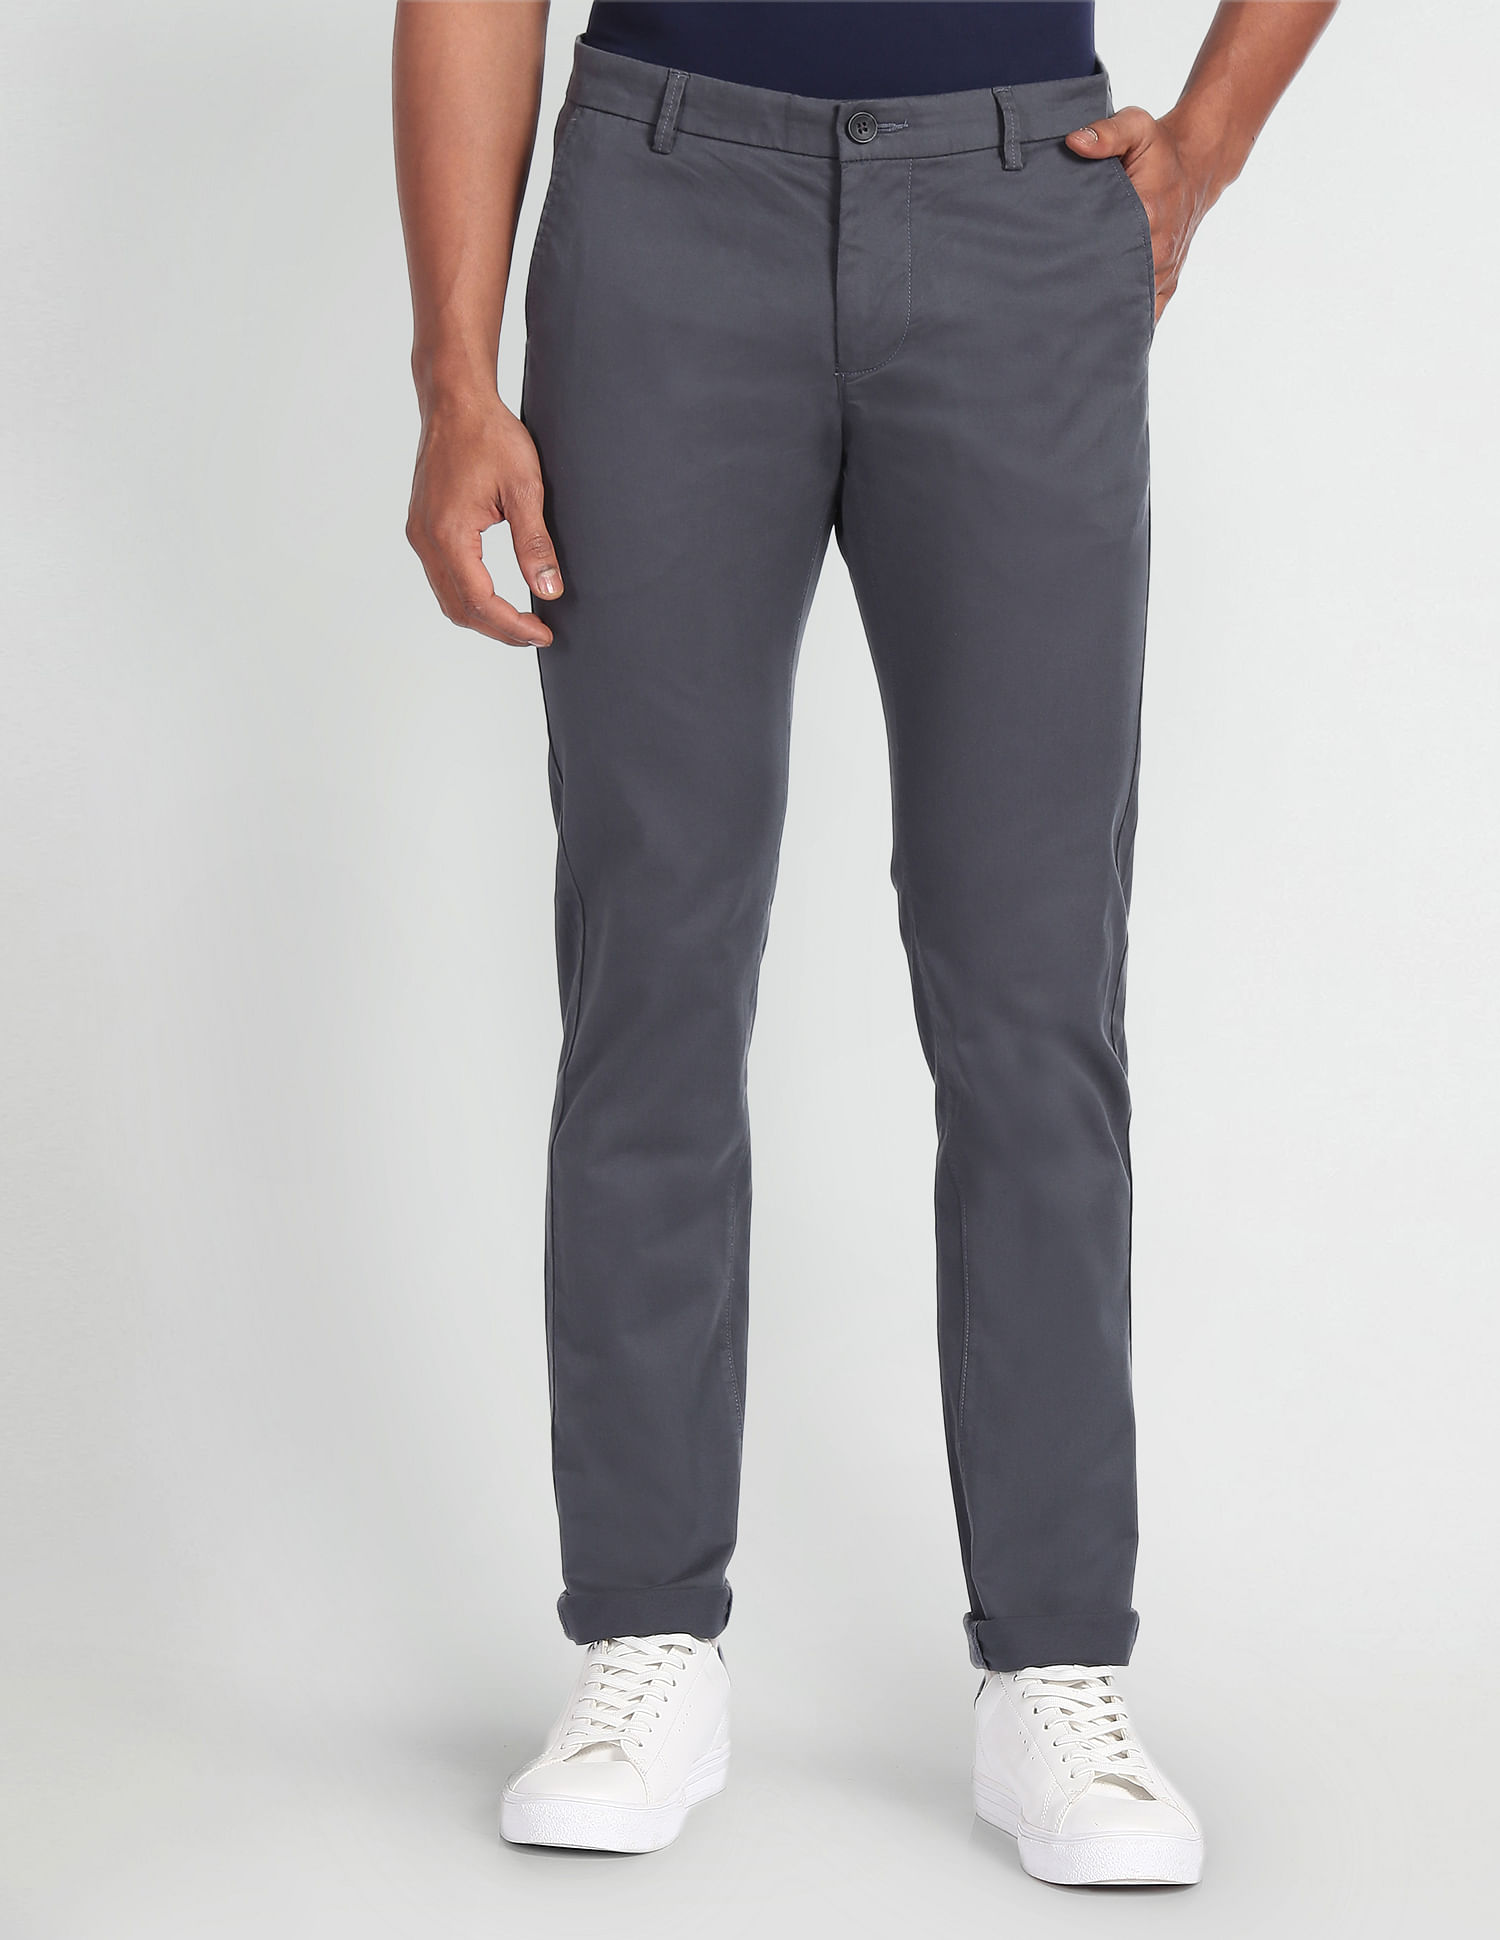 Buy Arrow Hudson Tailored Fit Solid Trousers - NNNOW.com